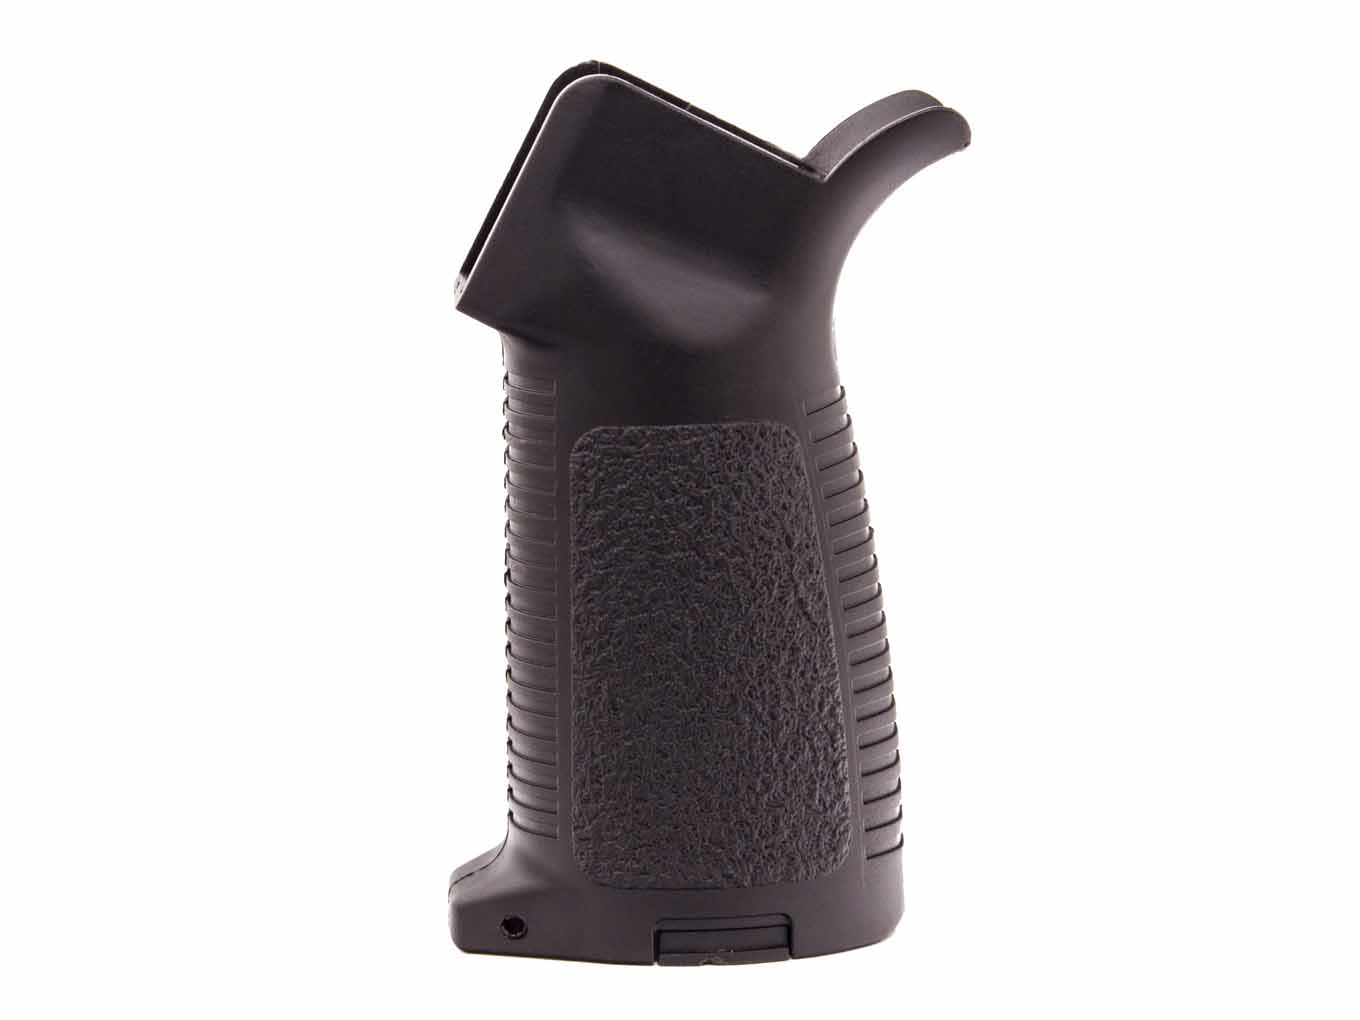 AOLS Motor Grip Quick Assembly for AEG M4/M16